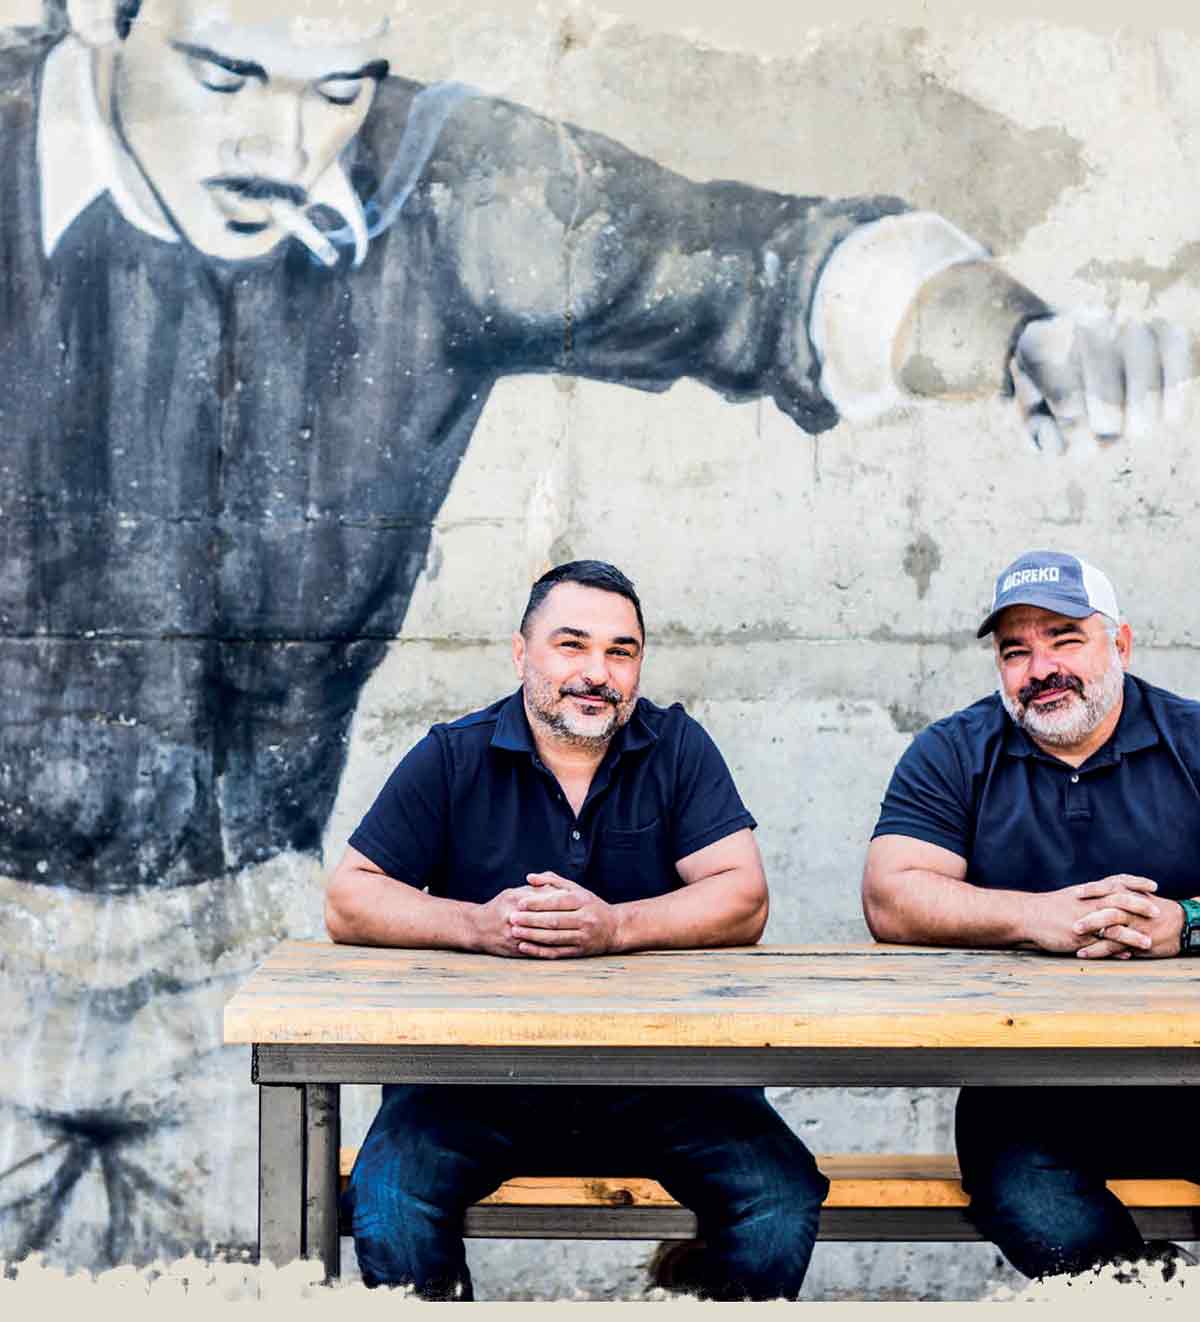 Greko chefs sitting at a wooden table in front of a wall mural.